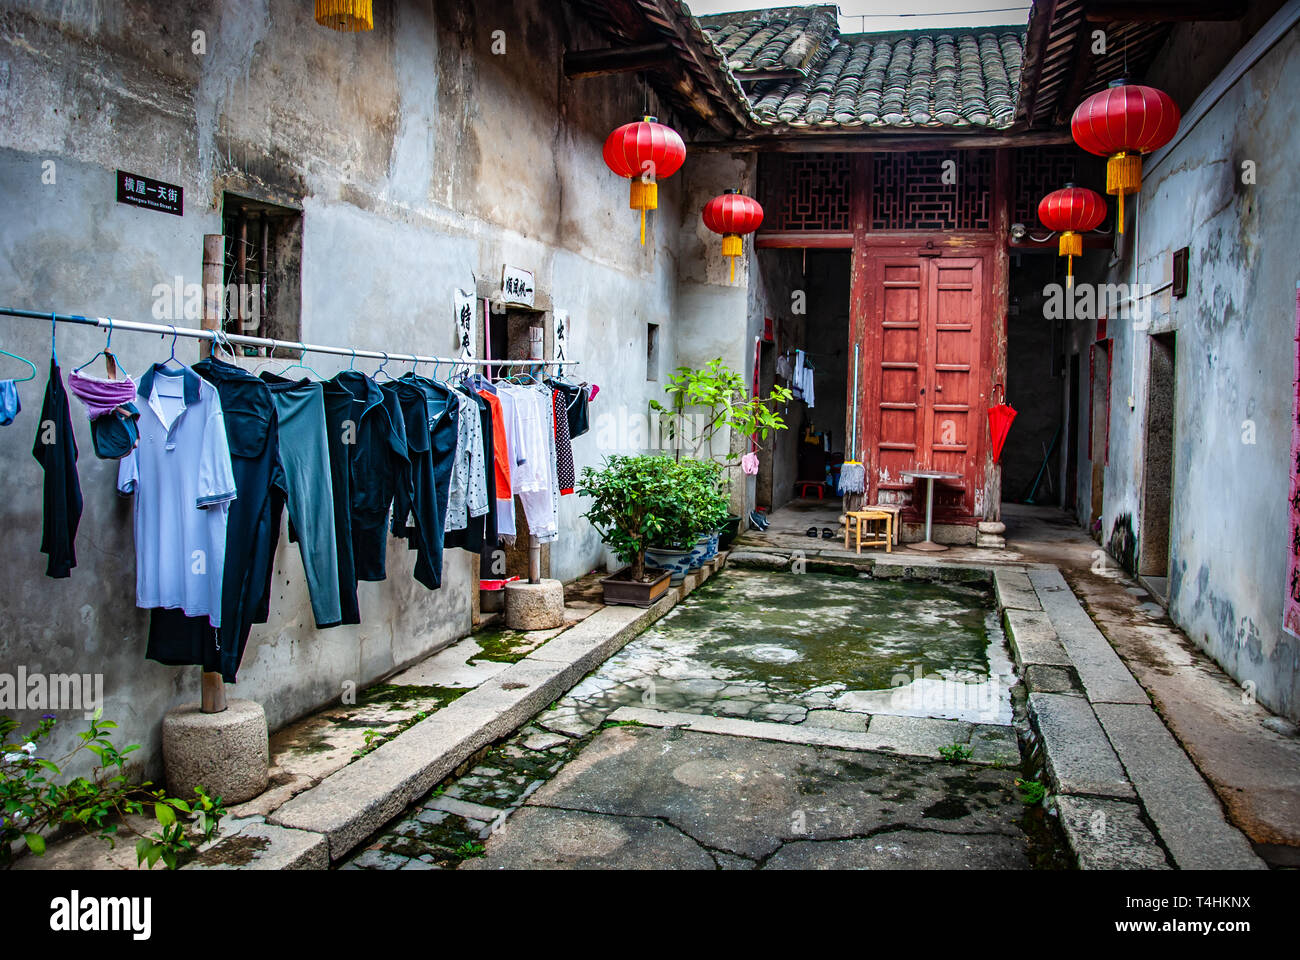 Drying laundry, courtyard of a traditional Chinese house. Laundry hangs to dry outside, home with tile roof. Red lanterns, China, Interiors, poverty Stock Photo